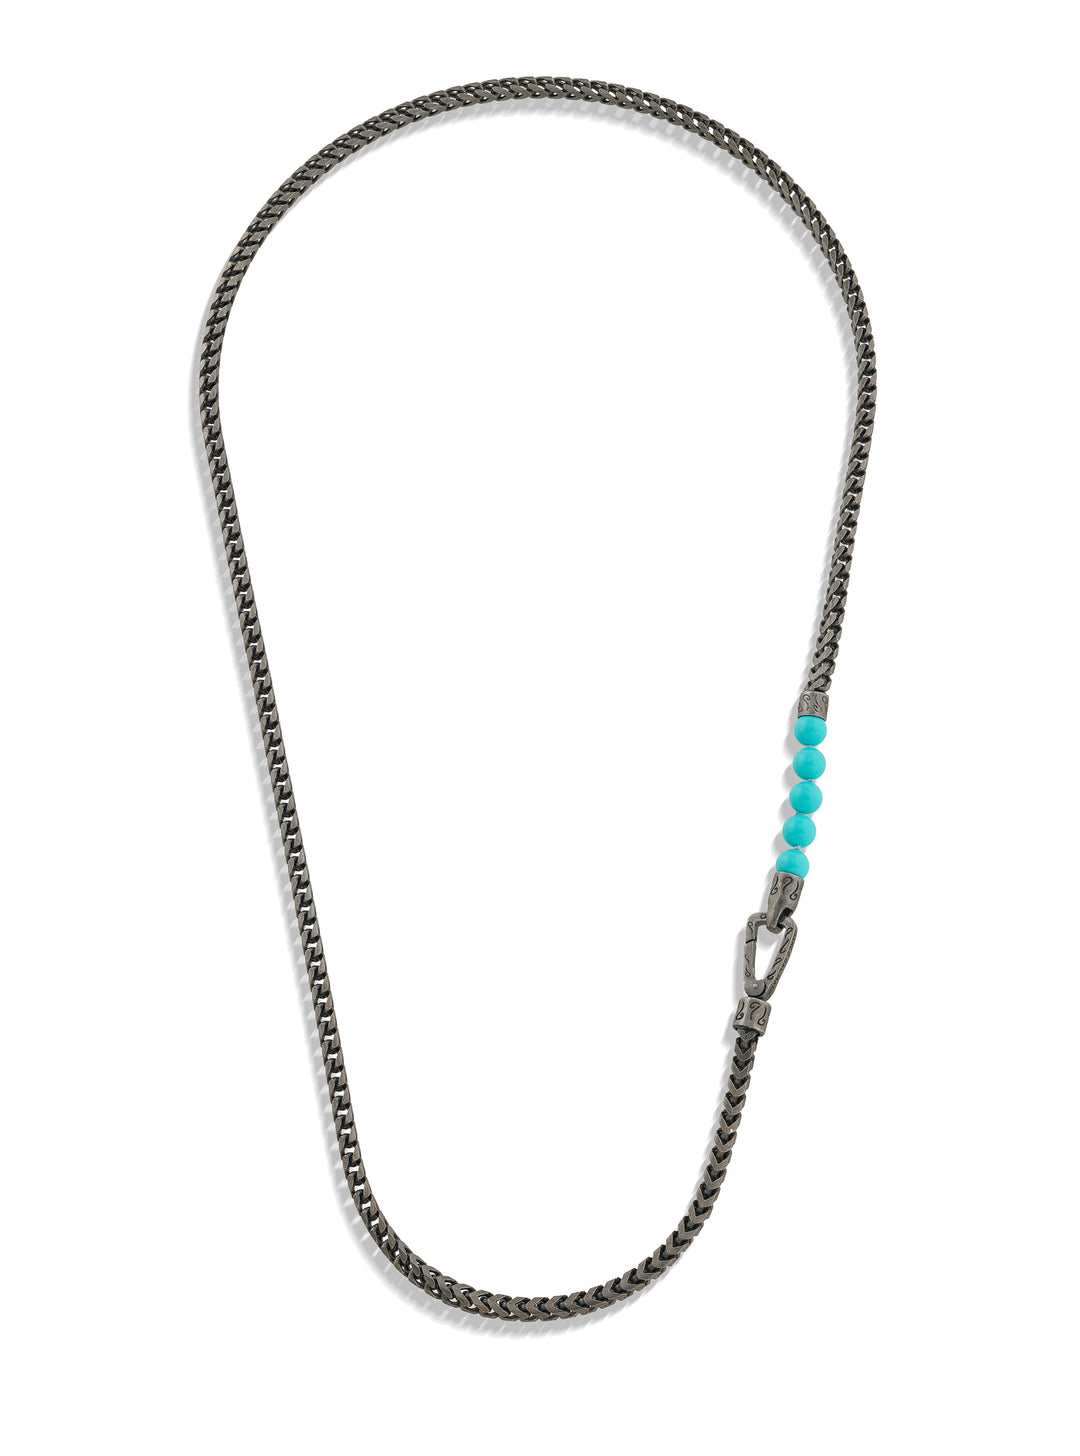 ULYSSES Turquoise Beads Chain Necklace